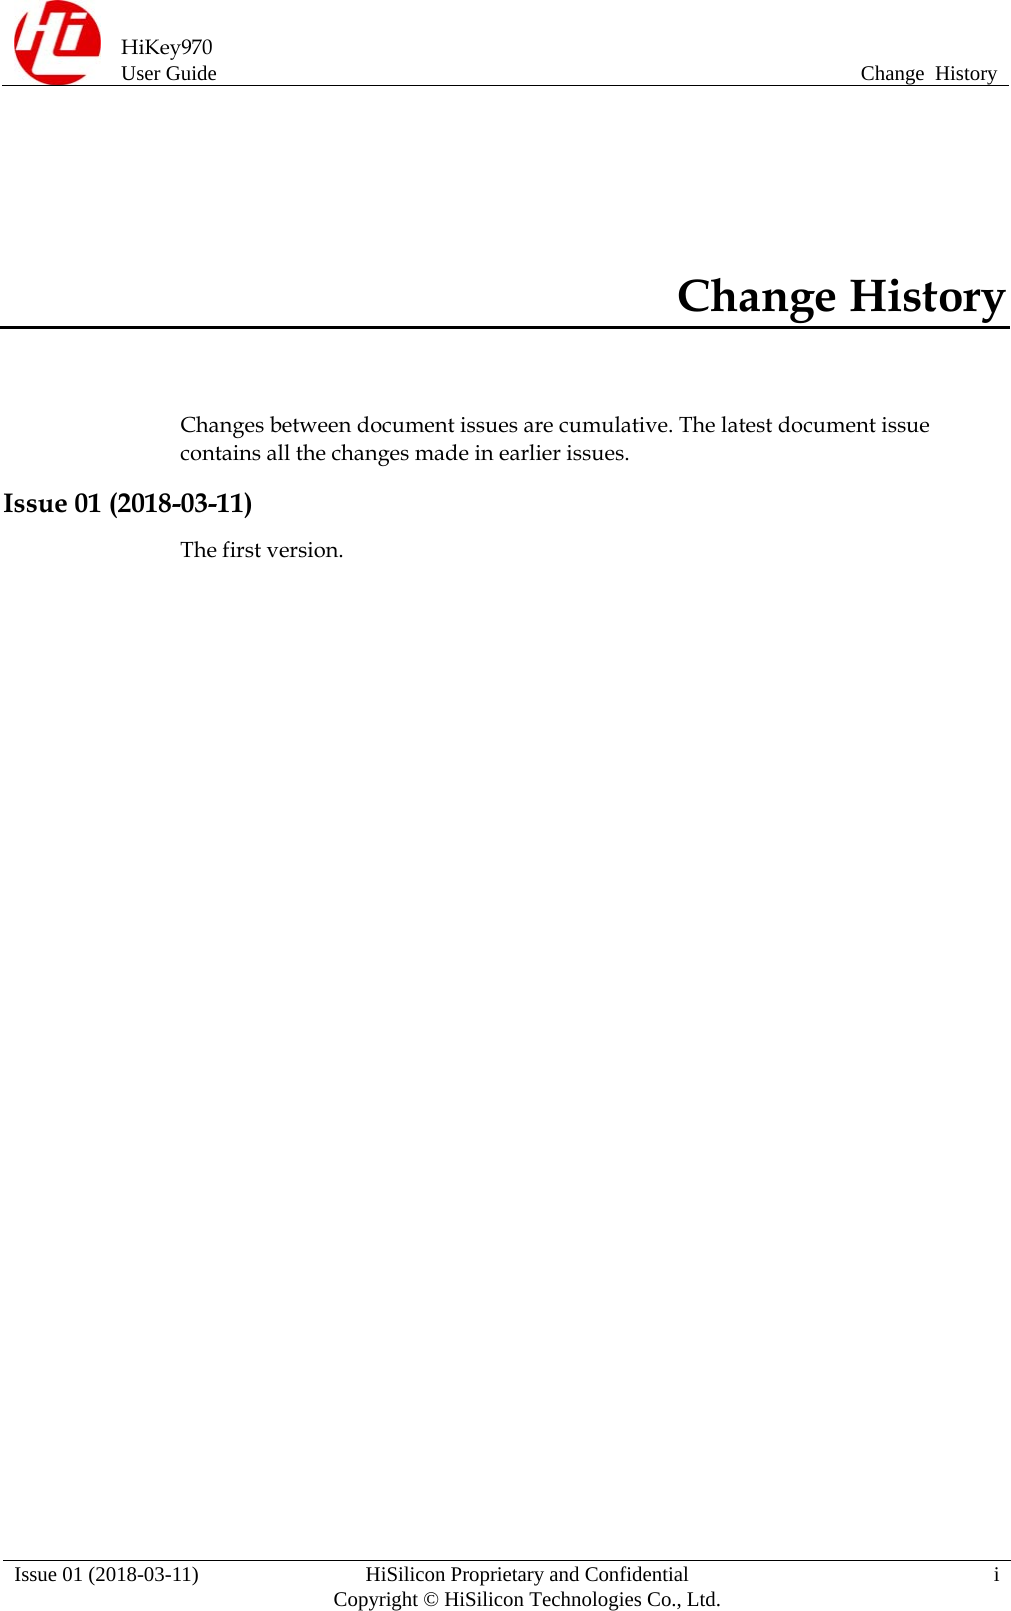  HiKey970 User Guide  Change  History  Issue 01 (2018-03-11)  HiSilicon Proprietary and Confidential          Copyright © HiSilicon Technologies Co., Ltd.  i Change History Changes between document issues are cumulative. The latest document issue contains all the changes made in earlier issues. Issue 01 (2018-03-11) The first version. 